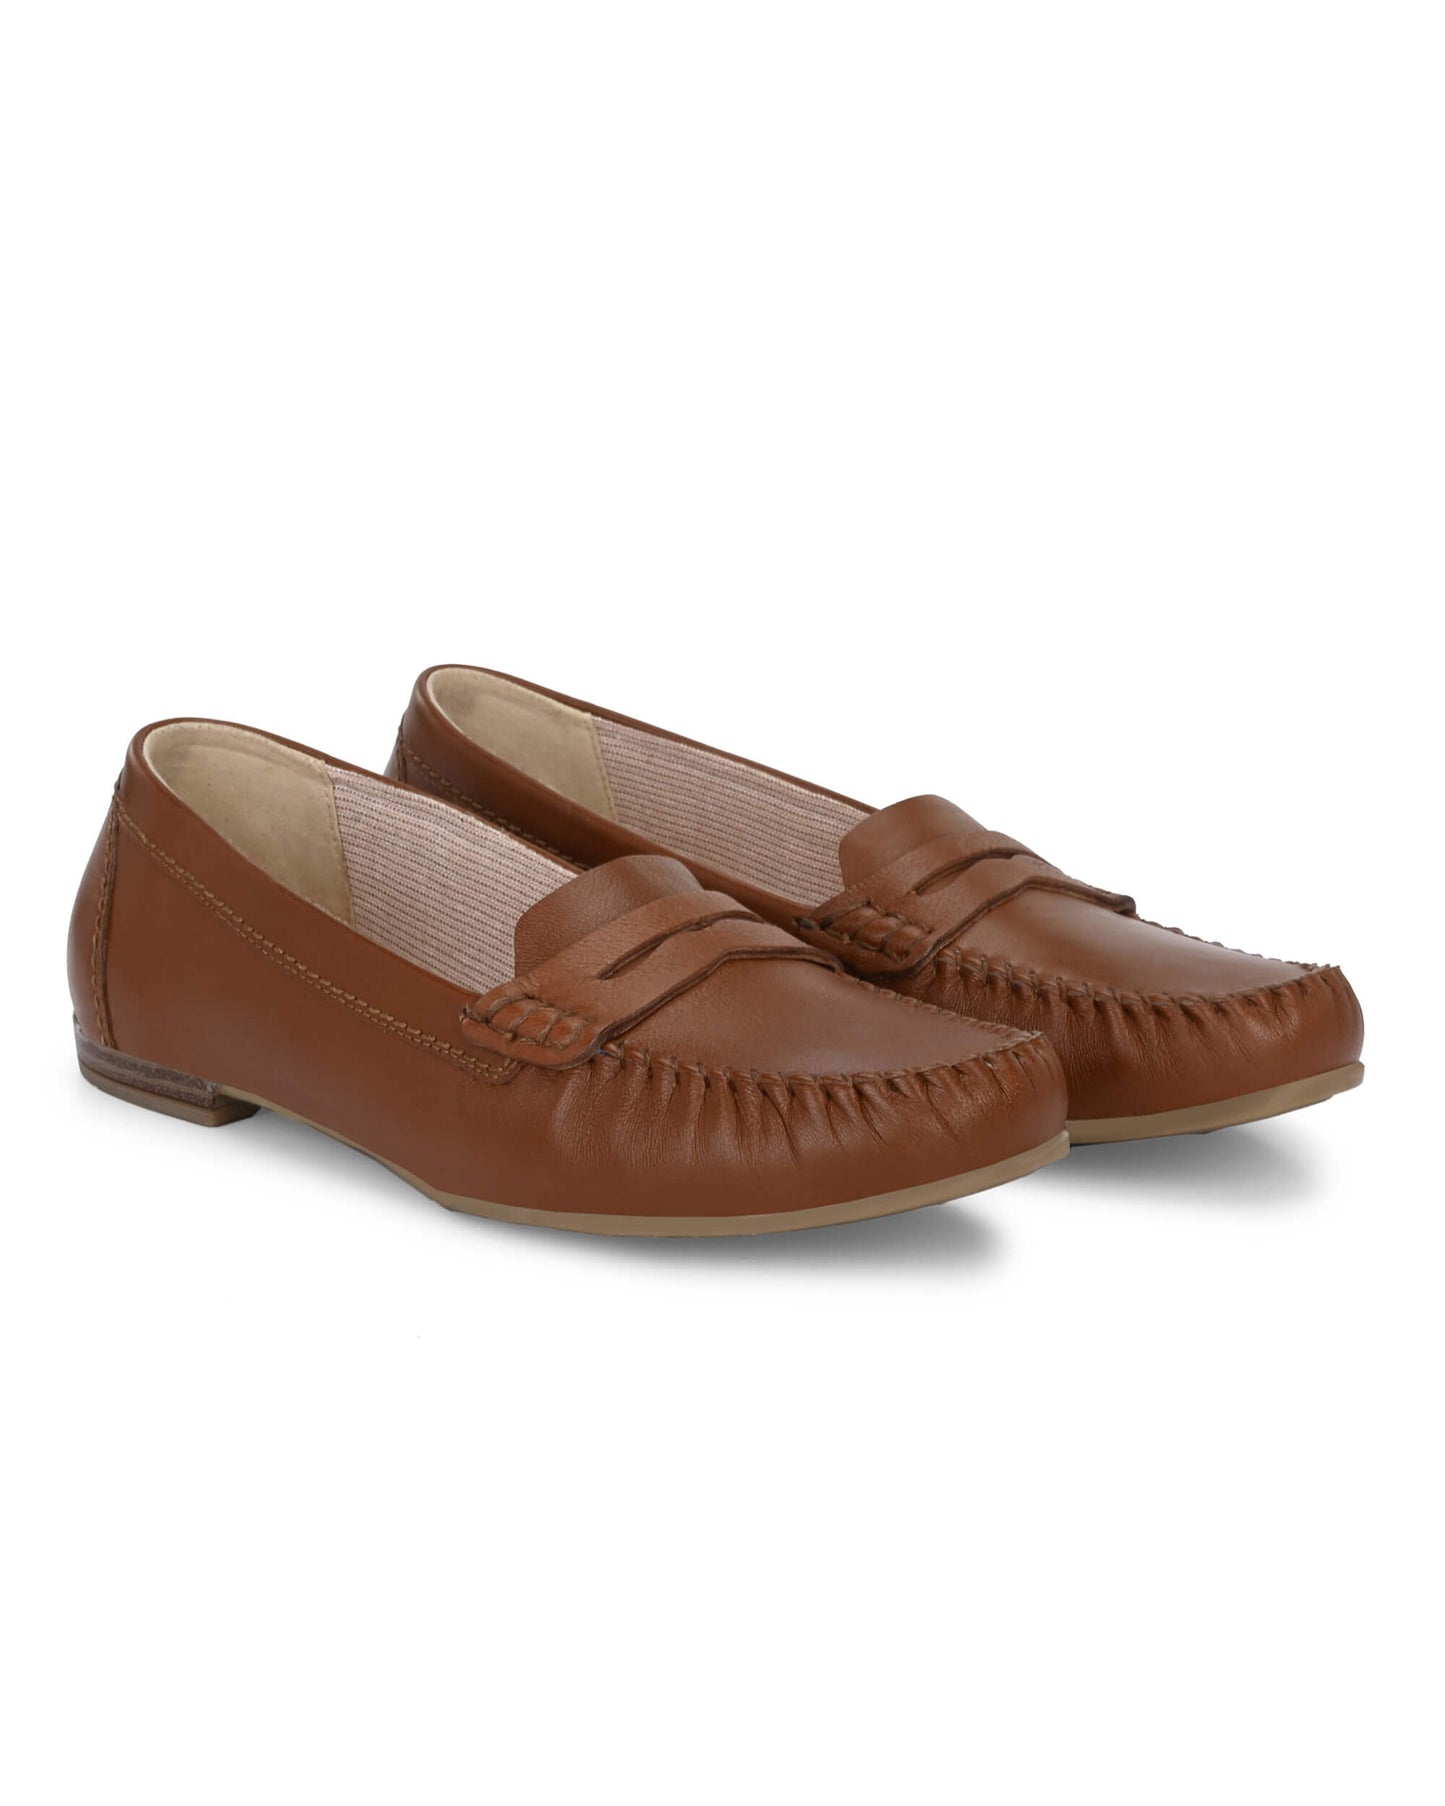 Audrey Brown Moccassin